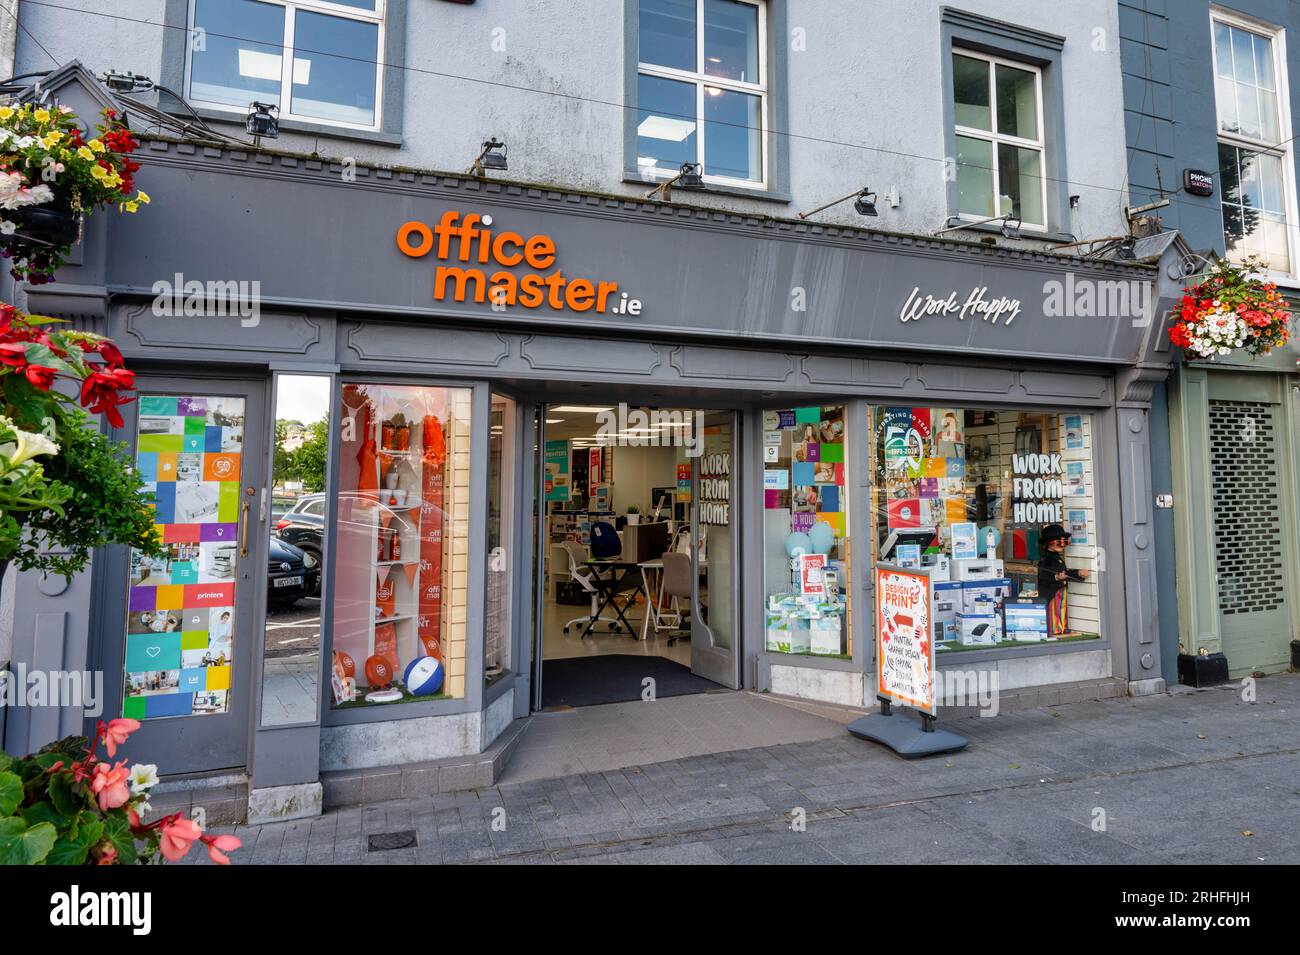 Waterford, Ireland- July 17, 2023: Office master.ie store in Waterford Ireland Stock Photo